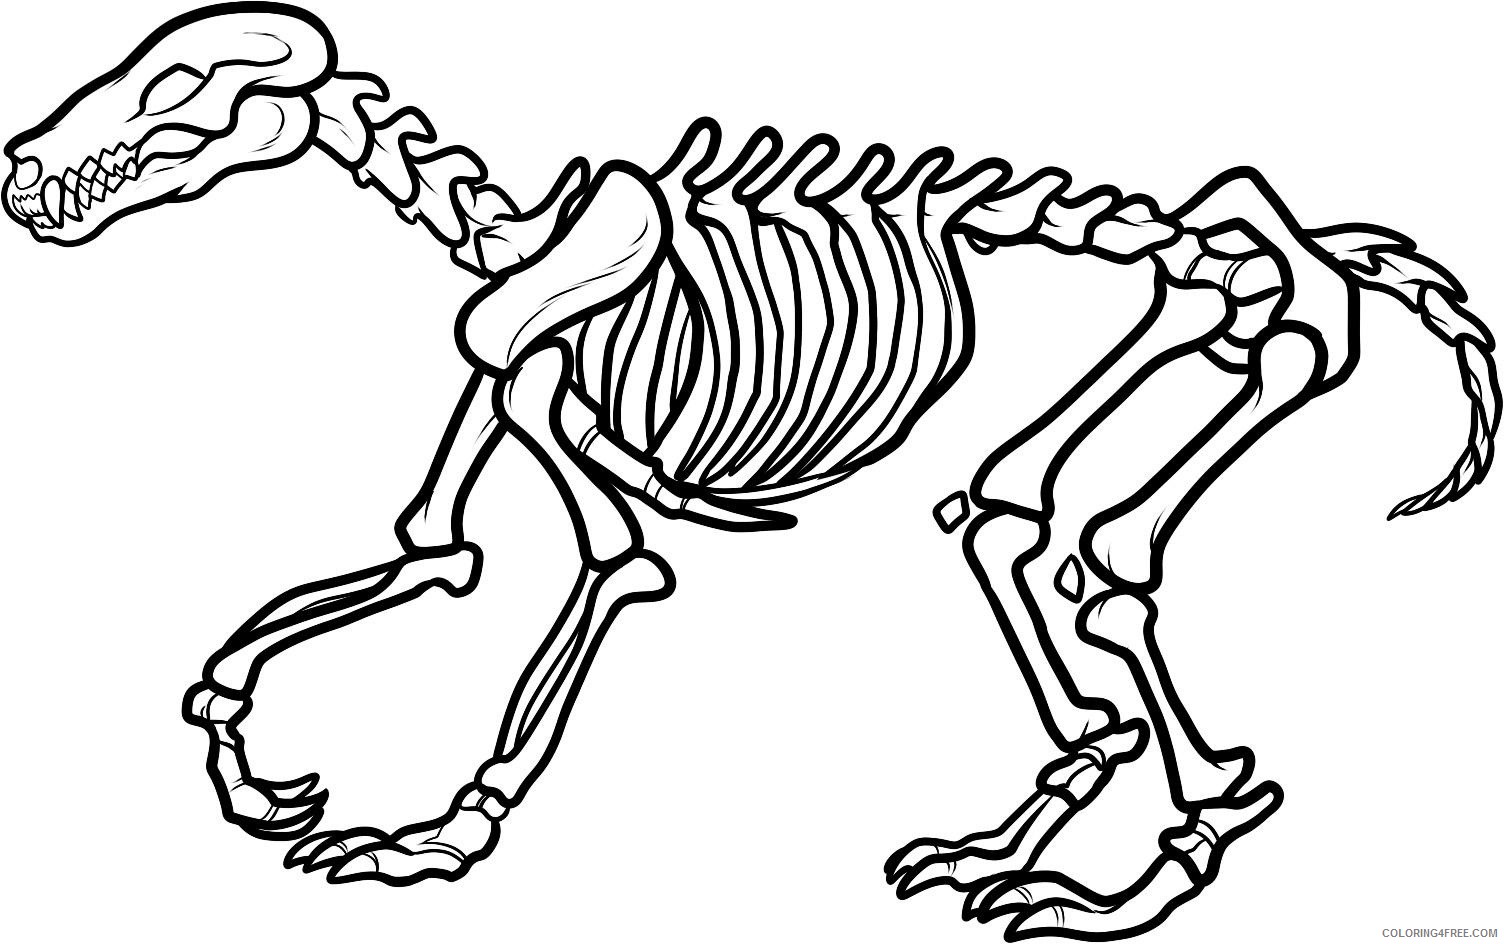 dinosaur skeleton coloring pages Coloring4free